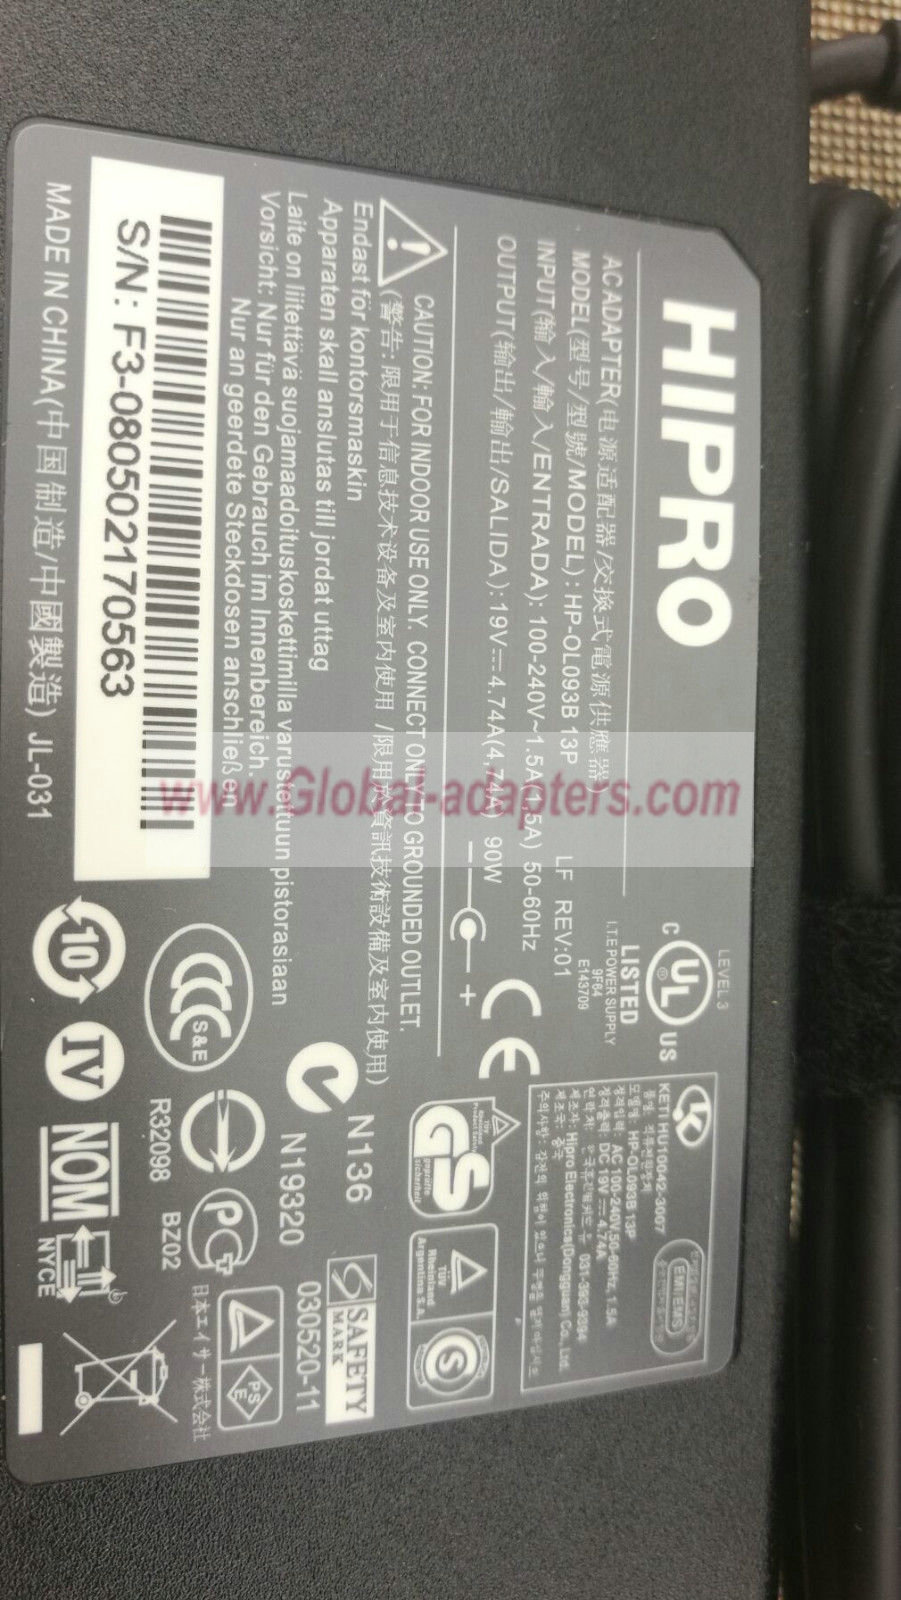 NEW 19V 4.74A HIPRO HP-OL093B 13P Laptop Ac Adapter